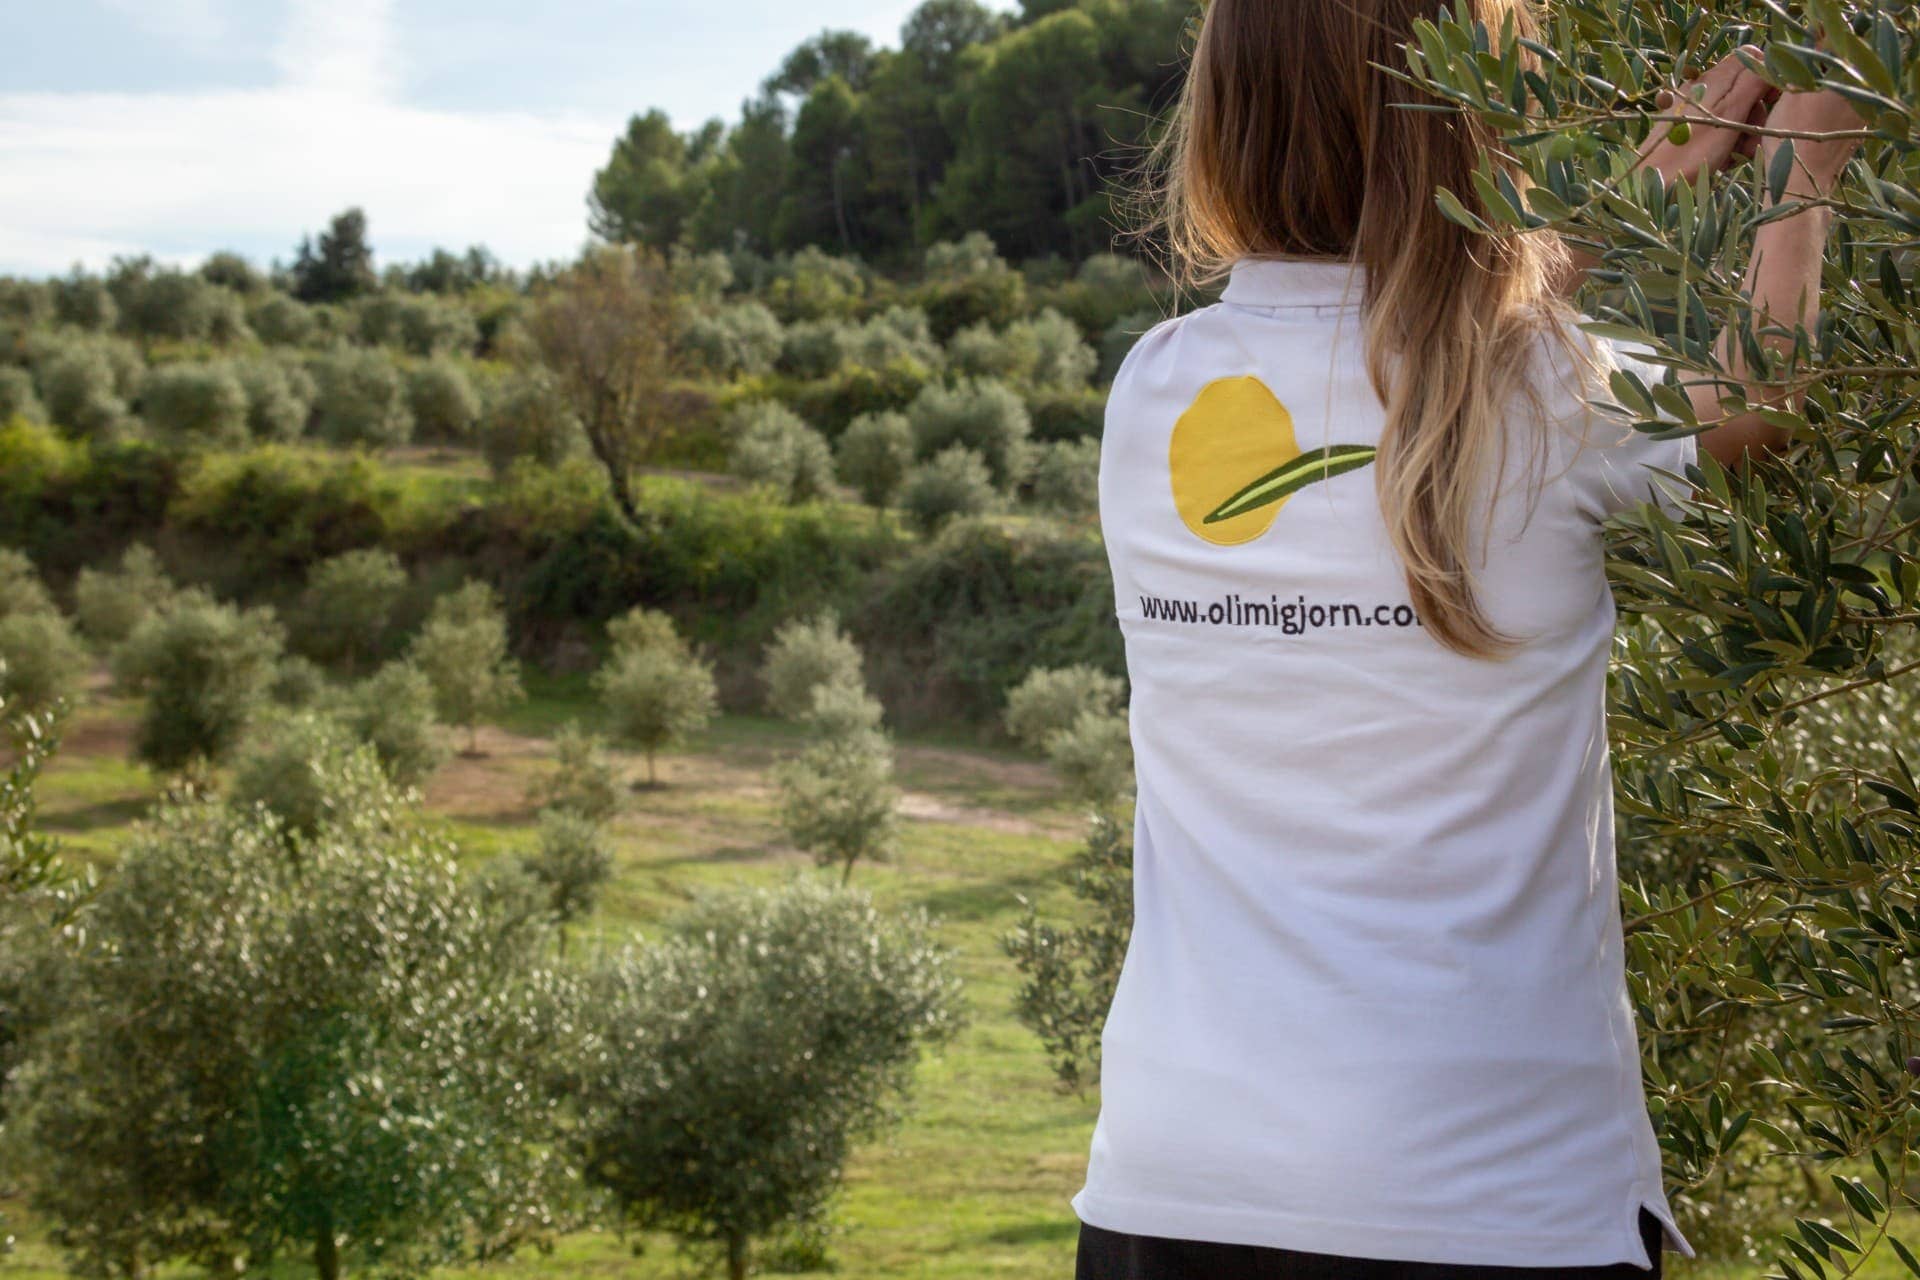 europe-competitions-production-the-best-olive-oils-spanish-producers-achieve-record-success-at-world-competition-olive-oil-times